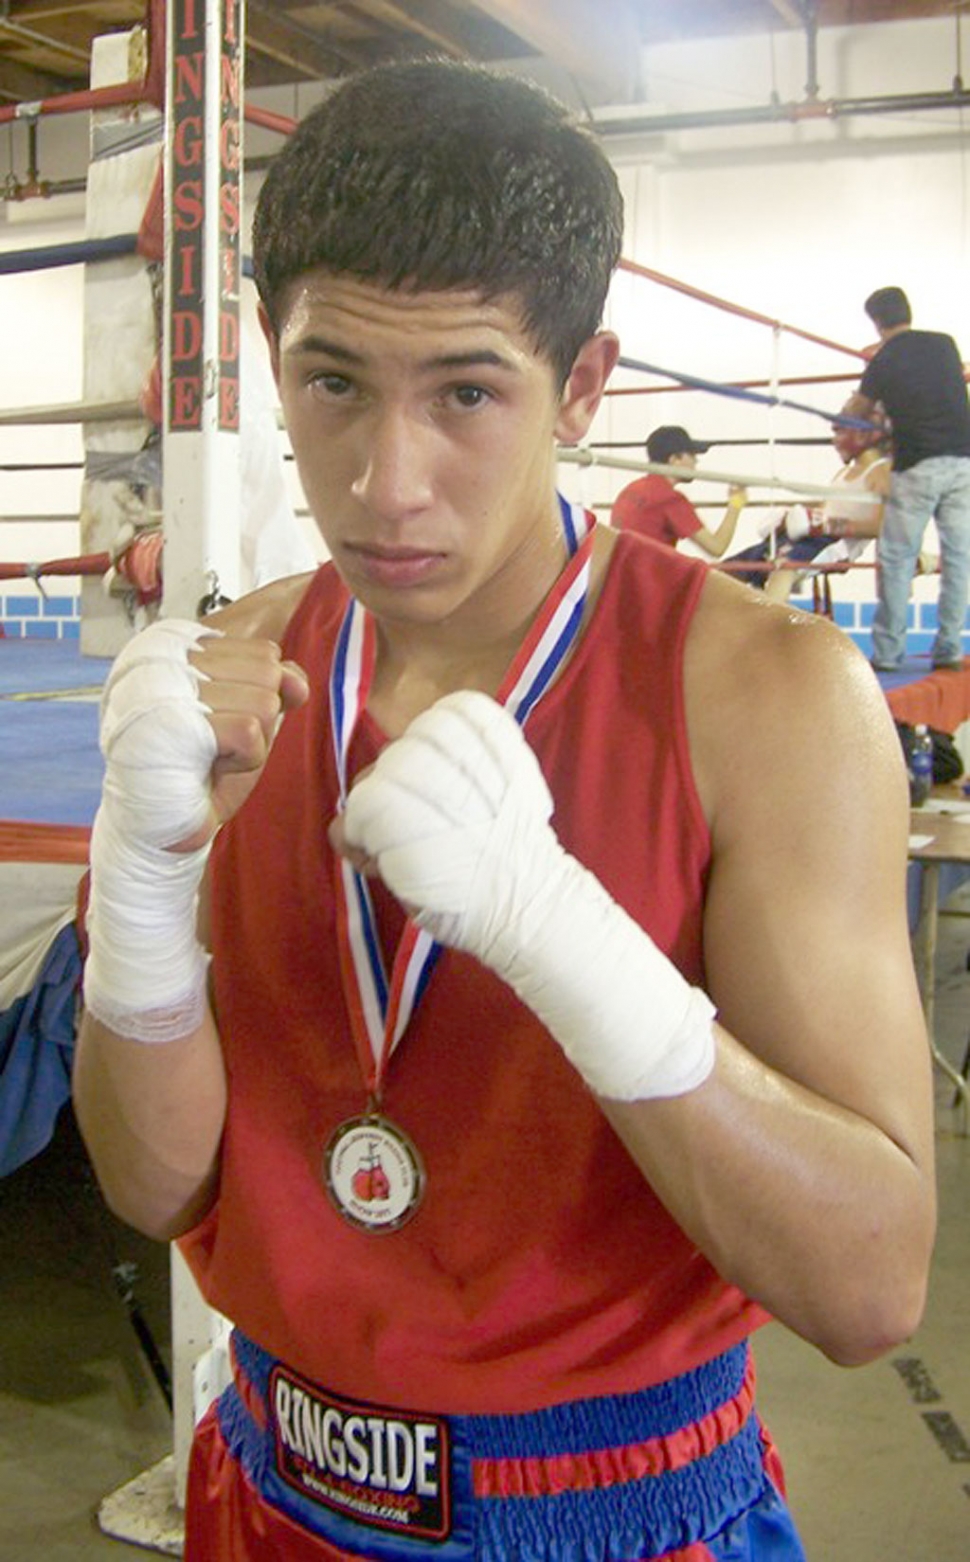 The Fillmore Boxing Club's Jonathan Minero competed at the Yo Valley Foothill Jeopardy Boxing Show in San Fernando, CA. April 2nd, 2011. Minero, pictured above with his medal, defeated Luis Pitones of Rose City Boxing Club by judges' decision in the 140 lb. weight class. His match was three rounds of two minute duration. The Fillmore Boxing Club is a member of USA Boxing and offers adult and youth boxing classes at Body Image Gym for more information call (805) 524-0891 or (805) 443-8501 or E-mail: fillmoreboxingclub@yahoo.com.